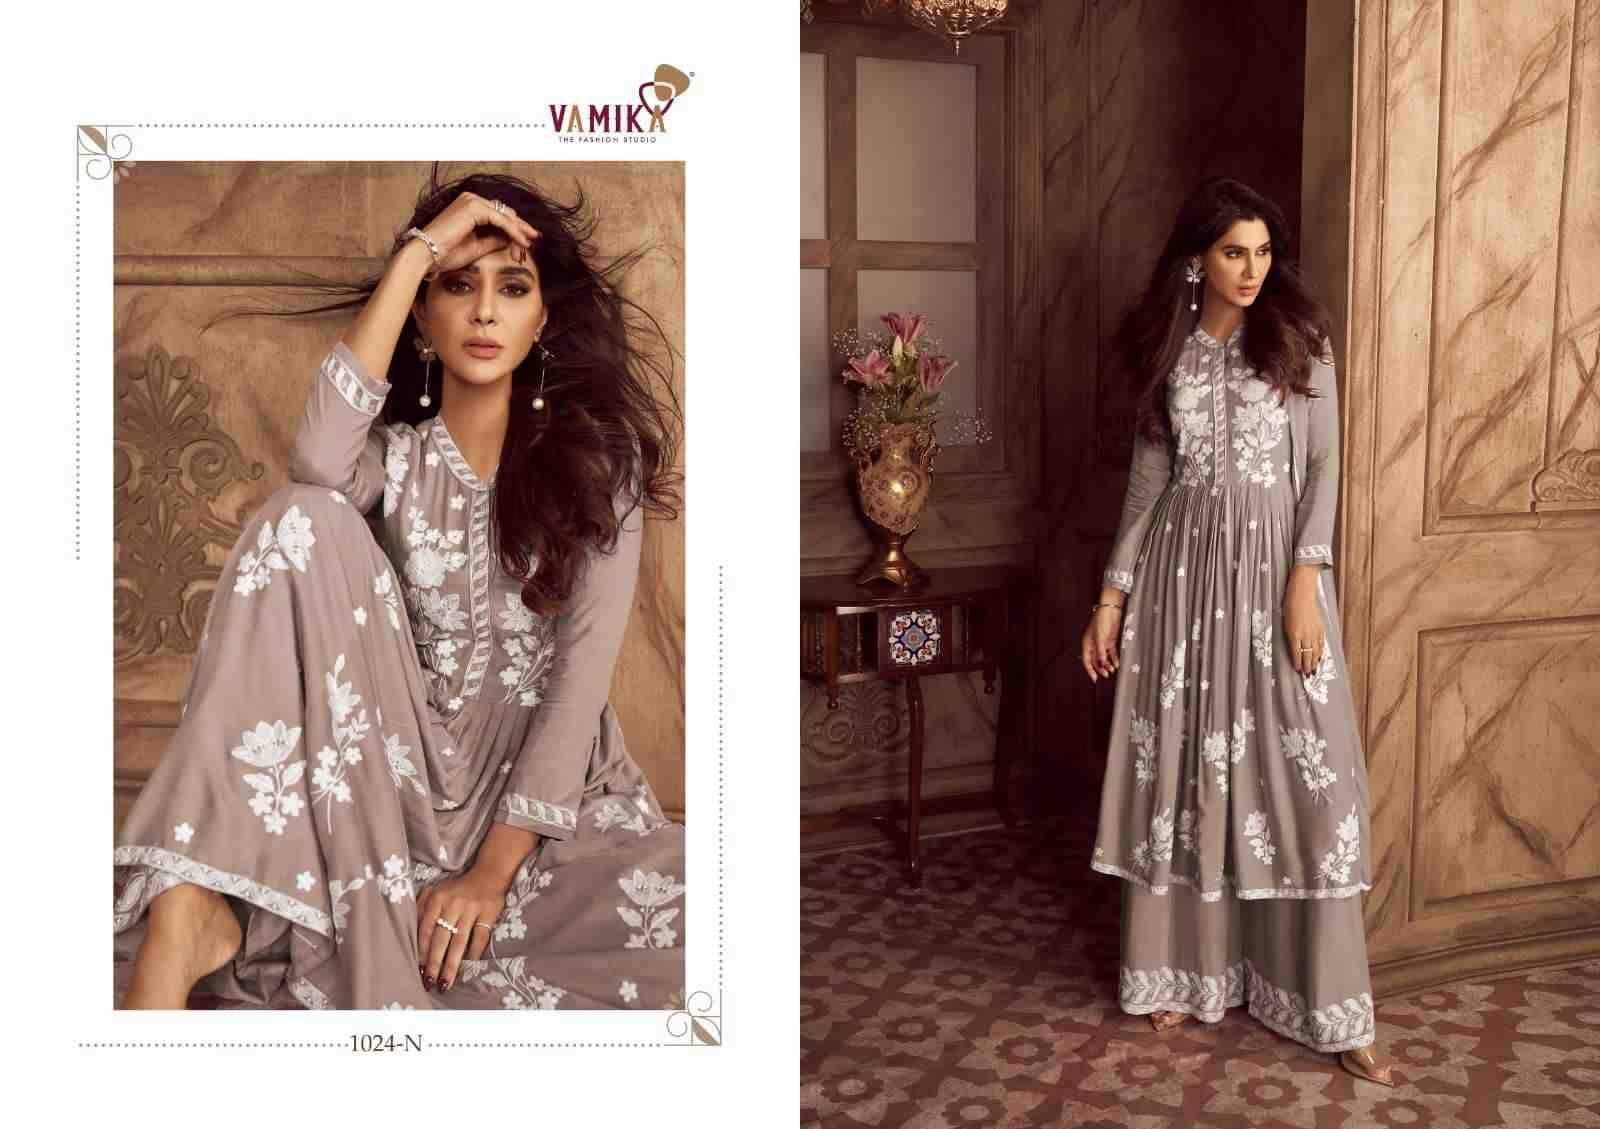 Lakhnawi Vol-4 Diamond By Vamika 1024-M To 1024-Q Series Beautiful Stylish Suits Fancy Colorful Casual Wear & Ethnic Wear & Ready To Wear Heavy Rayon Dresses At Wholesale Price